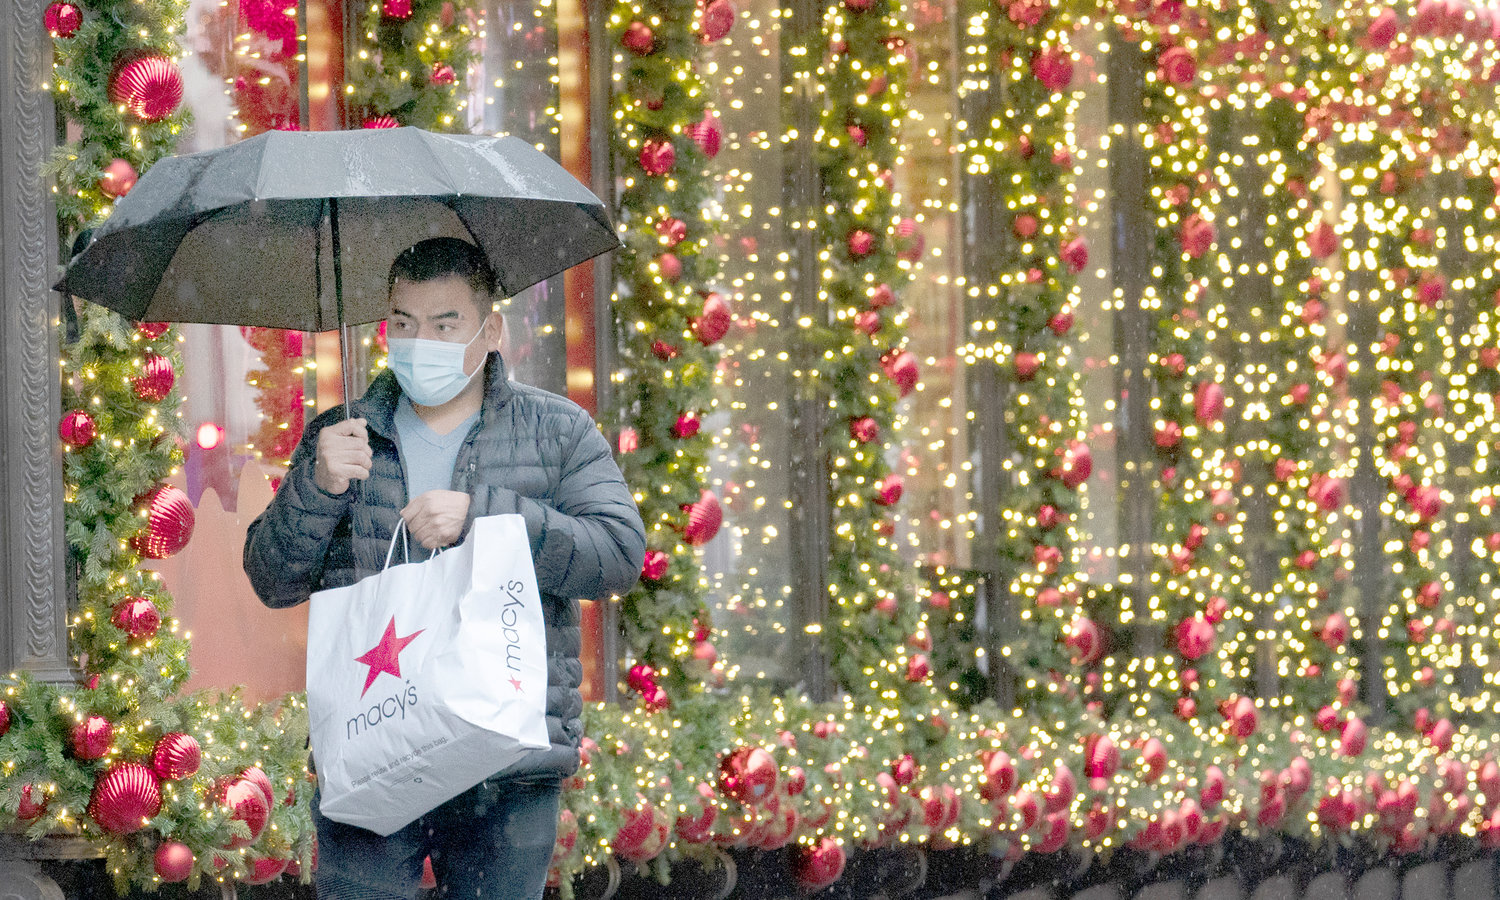 A shopper walks by a holiday window display in New York City in this file photo. Don’t wait to take care of any debt you incurred over the holidays, financial experts say.